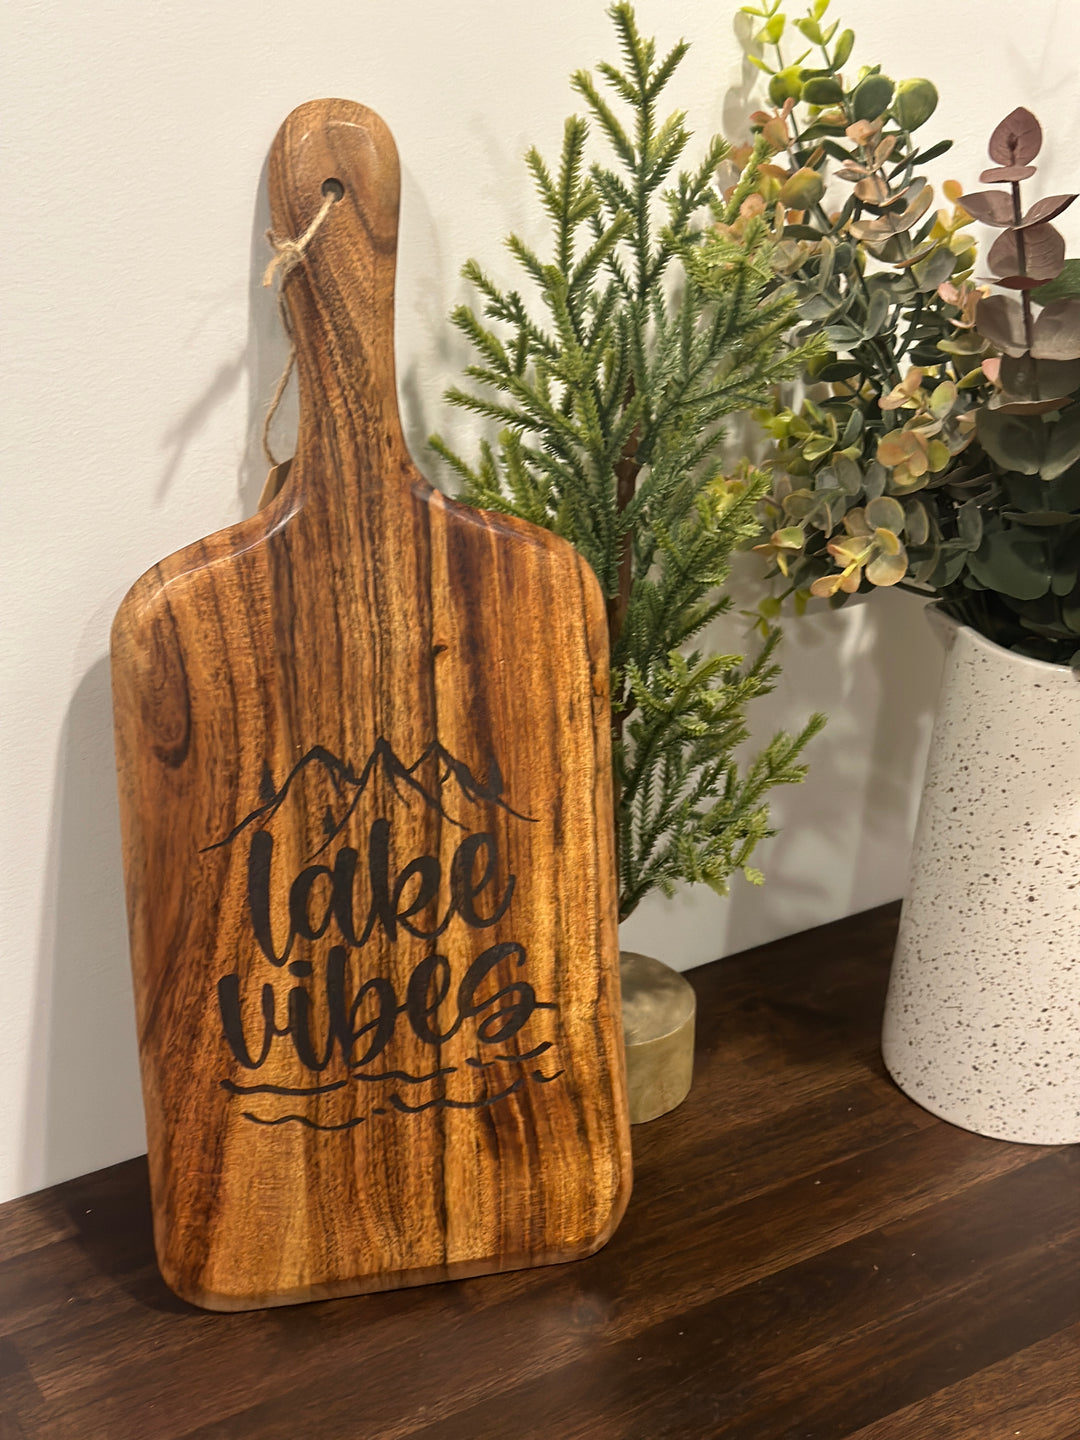 Lake Life Wooden Cutting Board (17”x7”) | Lake House Decor | Cheese Board | Various Designs